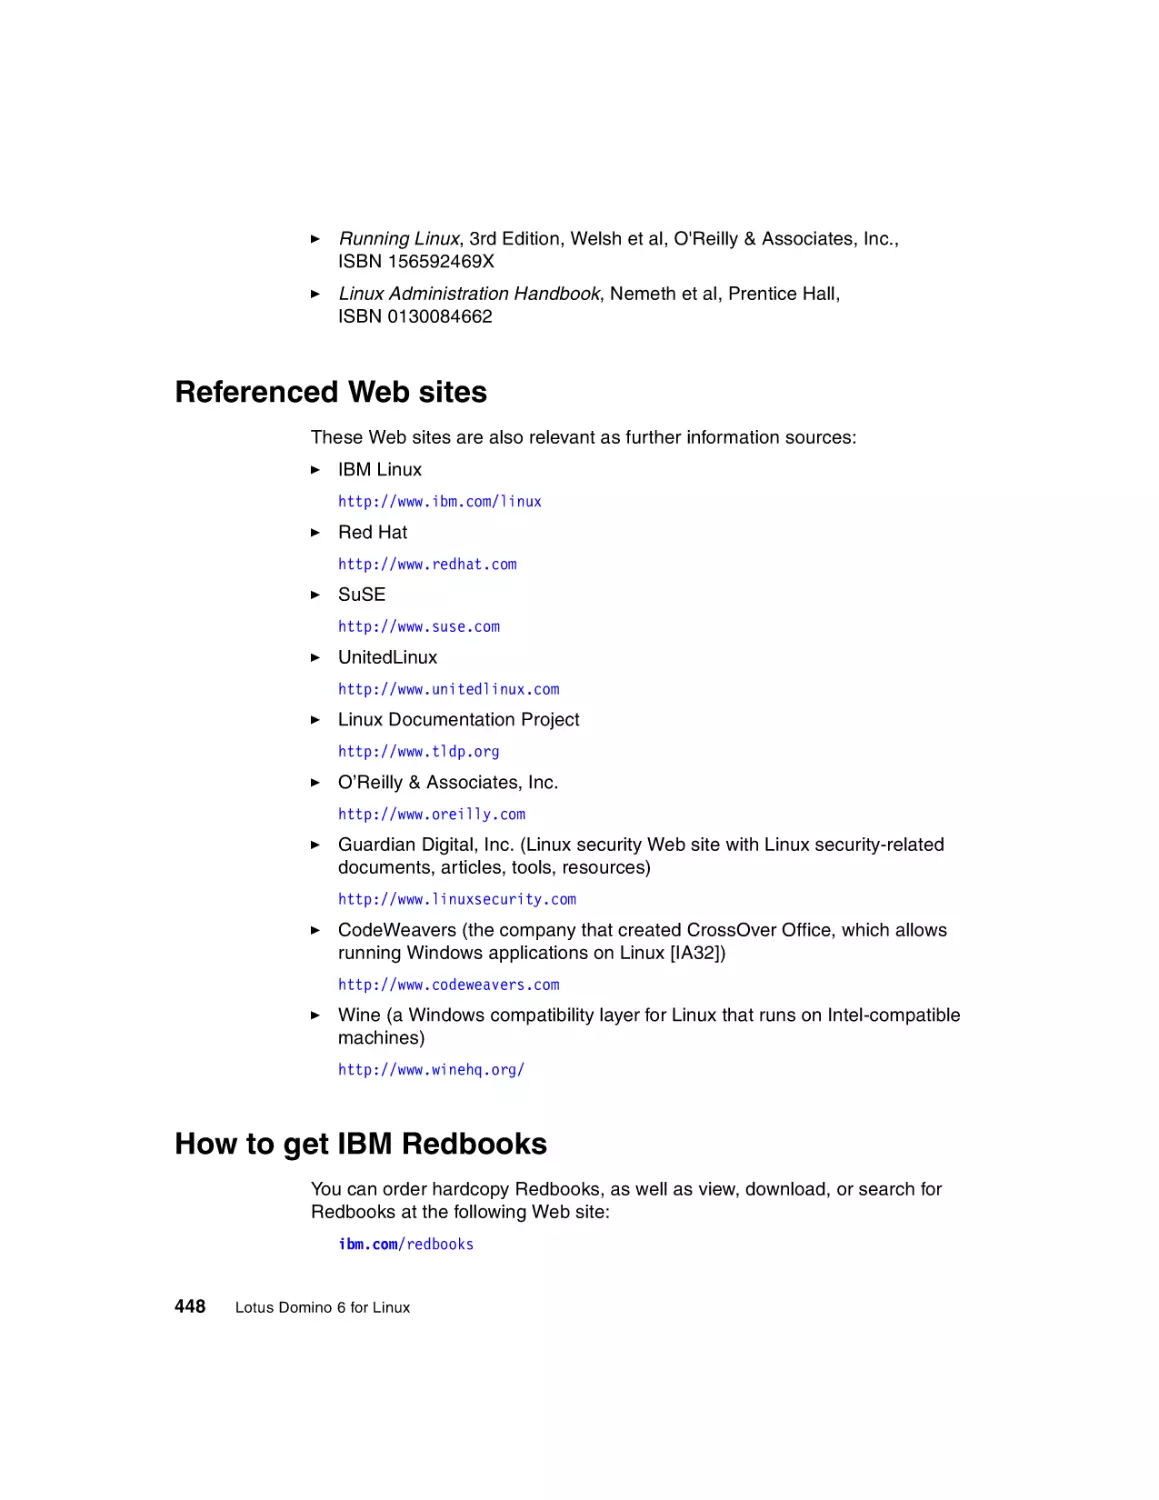 Referenced Web sites
How to get IBM Redbooks